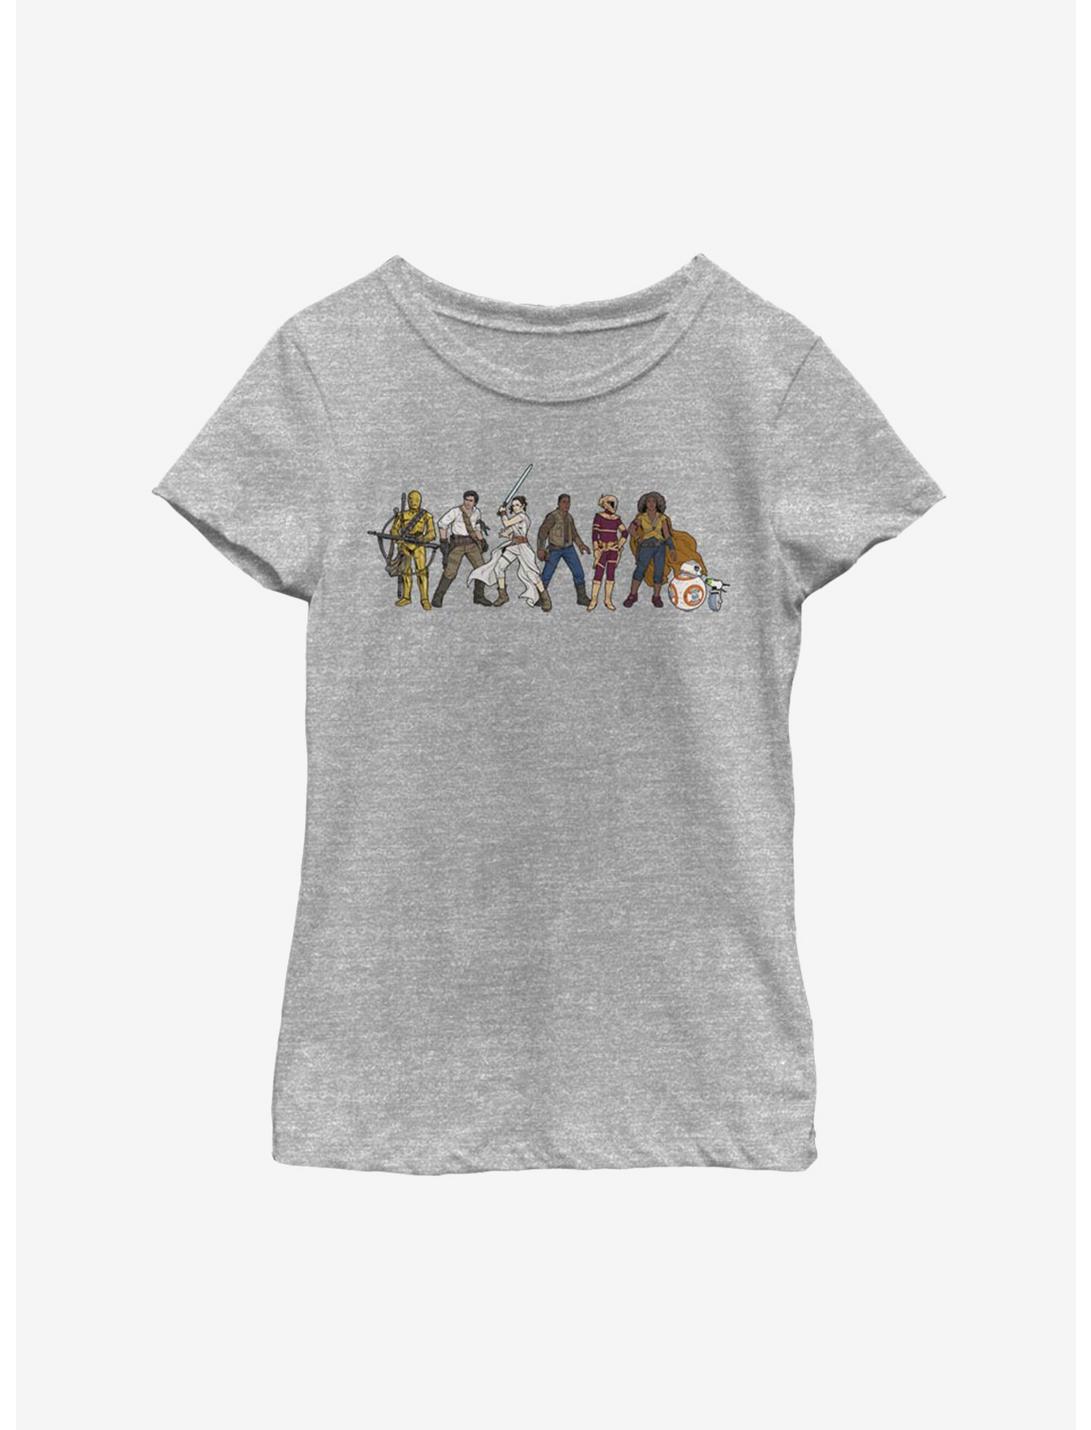 Star Wars Episode IX The Rise Of Skywalker Resistance Lineup Youth Girls T-Shirt, ATH HTR, hi-res